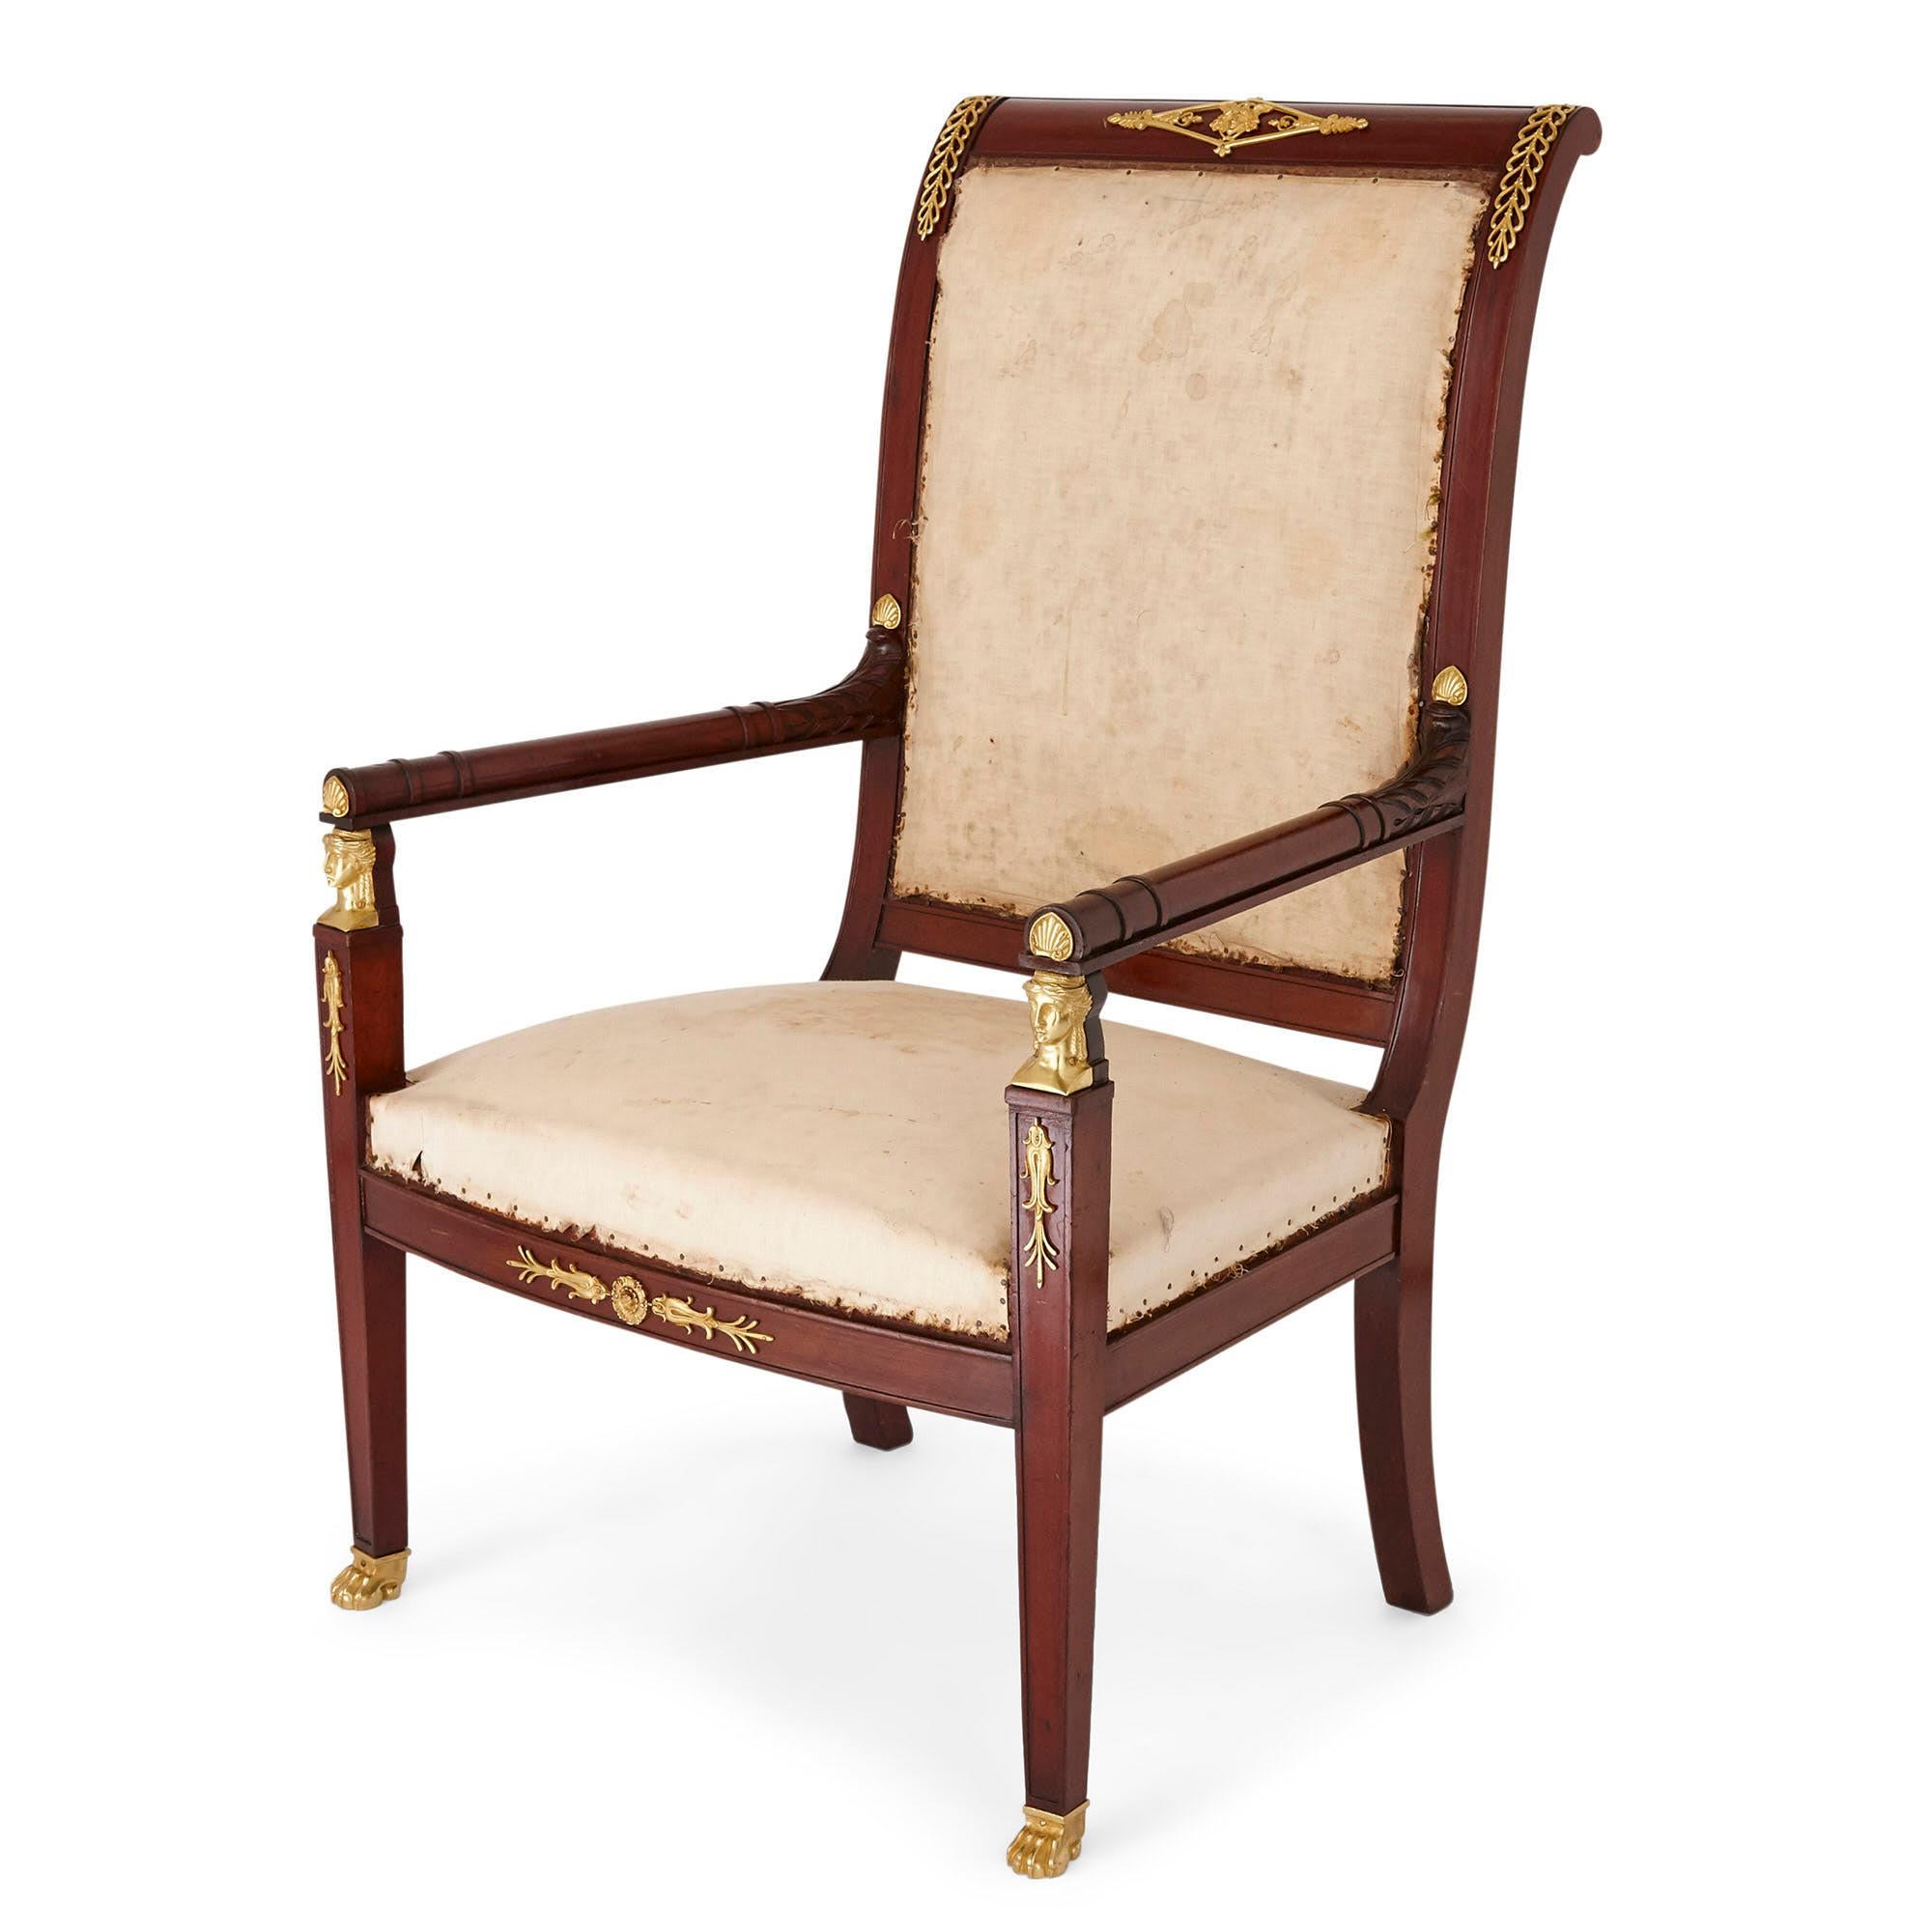 Pair of antique French Empire style mahogany and gilt bronze armchairs.
French, 19th century
Dimensions: Height 108cm, width 70cm, depth 60cm

This pair of French Empire style fauteuil armchairs are crafted from mahogany with ormolu mounts and